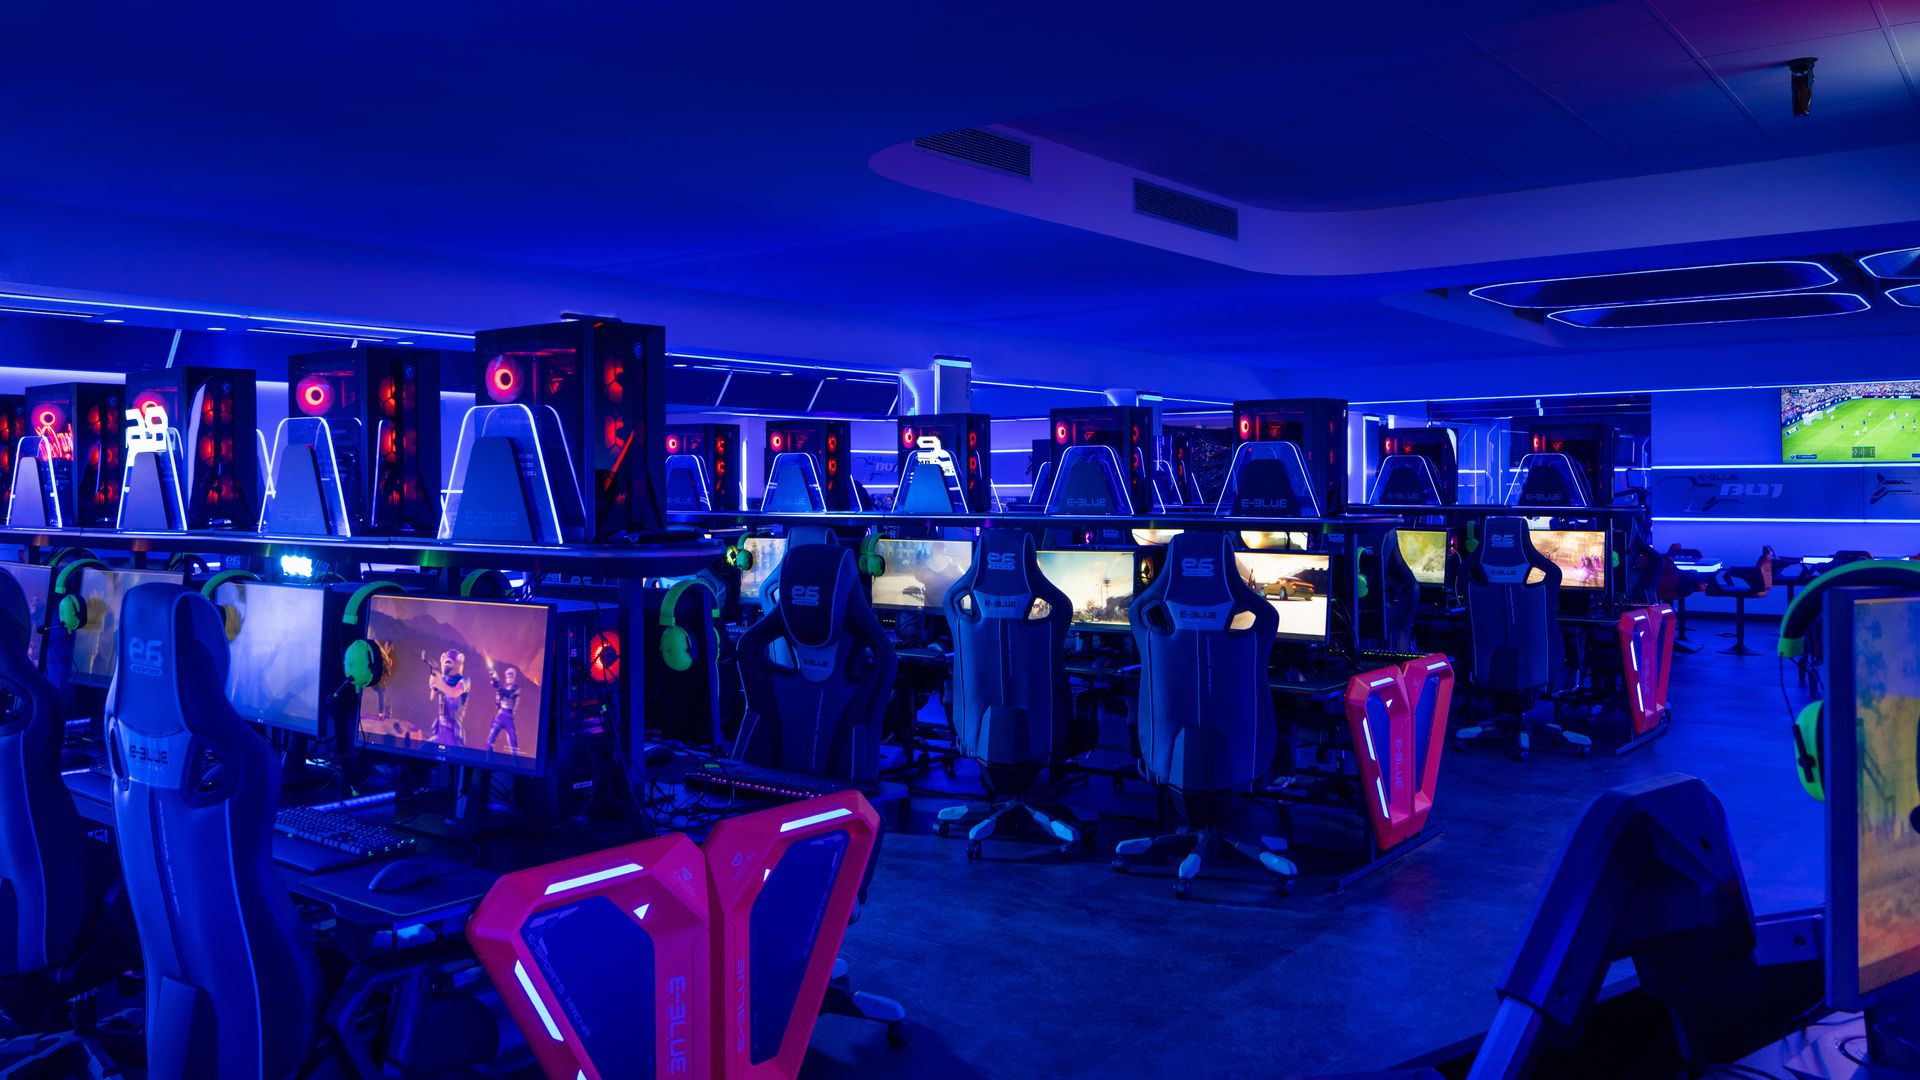 Rows of gaming PCs under a blue light. 